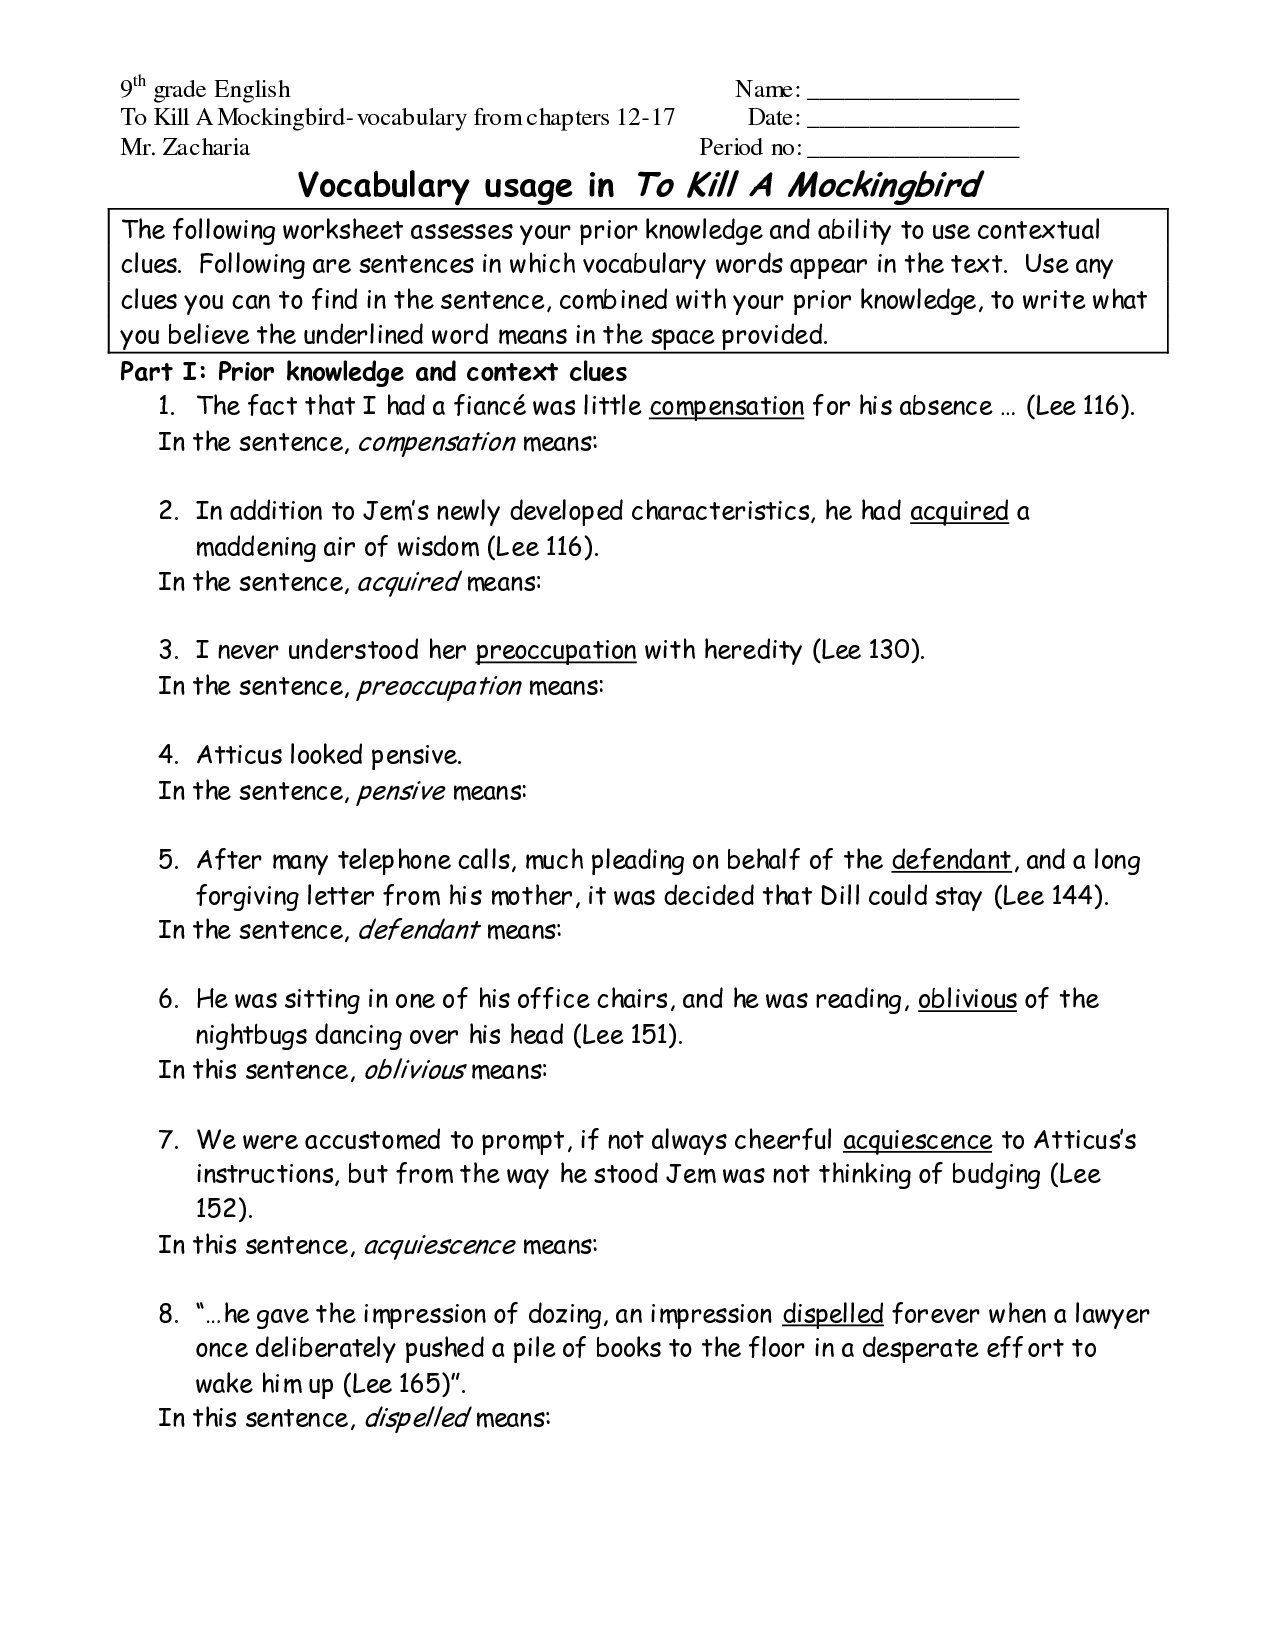 Context Clues Worksheets 9th Grade Image